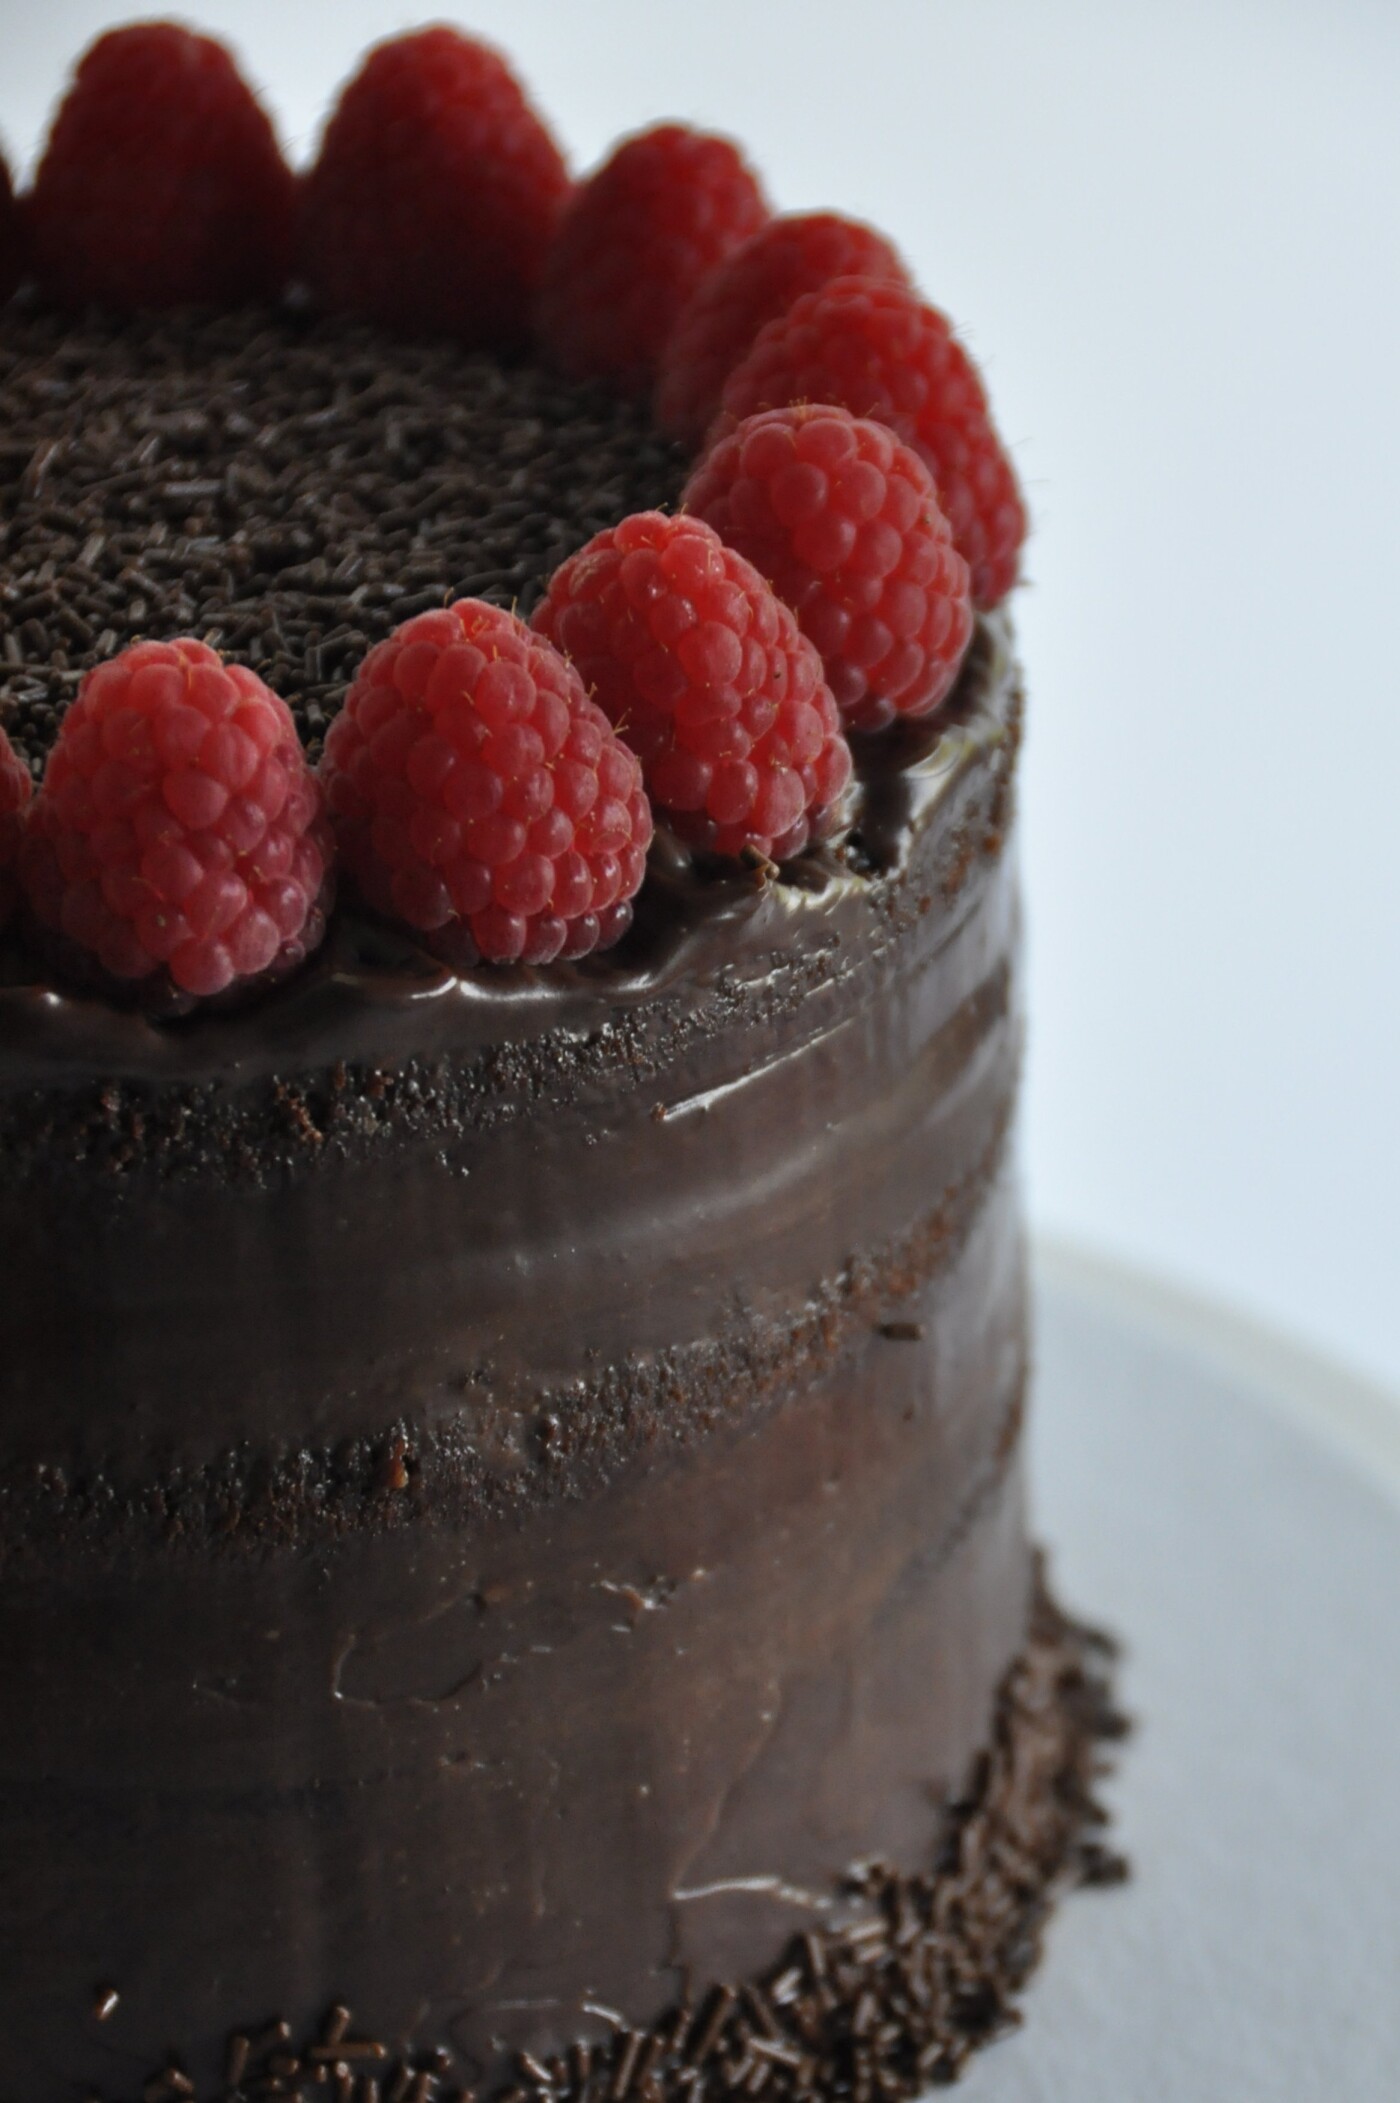 This is my signature cake. It is called "Tomás", after the little boy (not so little now) that told me to add the raspberries in each layer. It was the final touch to my chocolate cake and it is my clients' favorite for some time now.